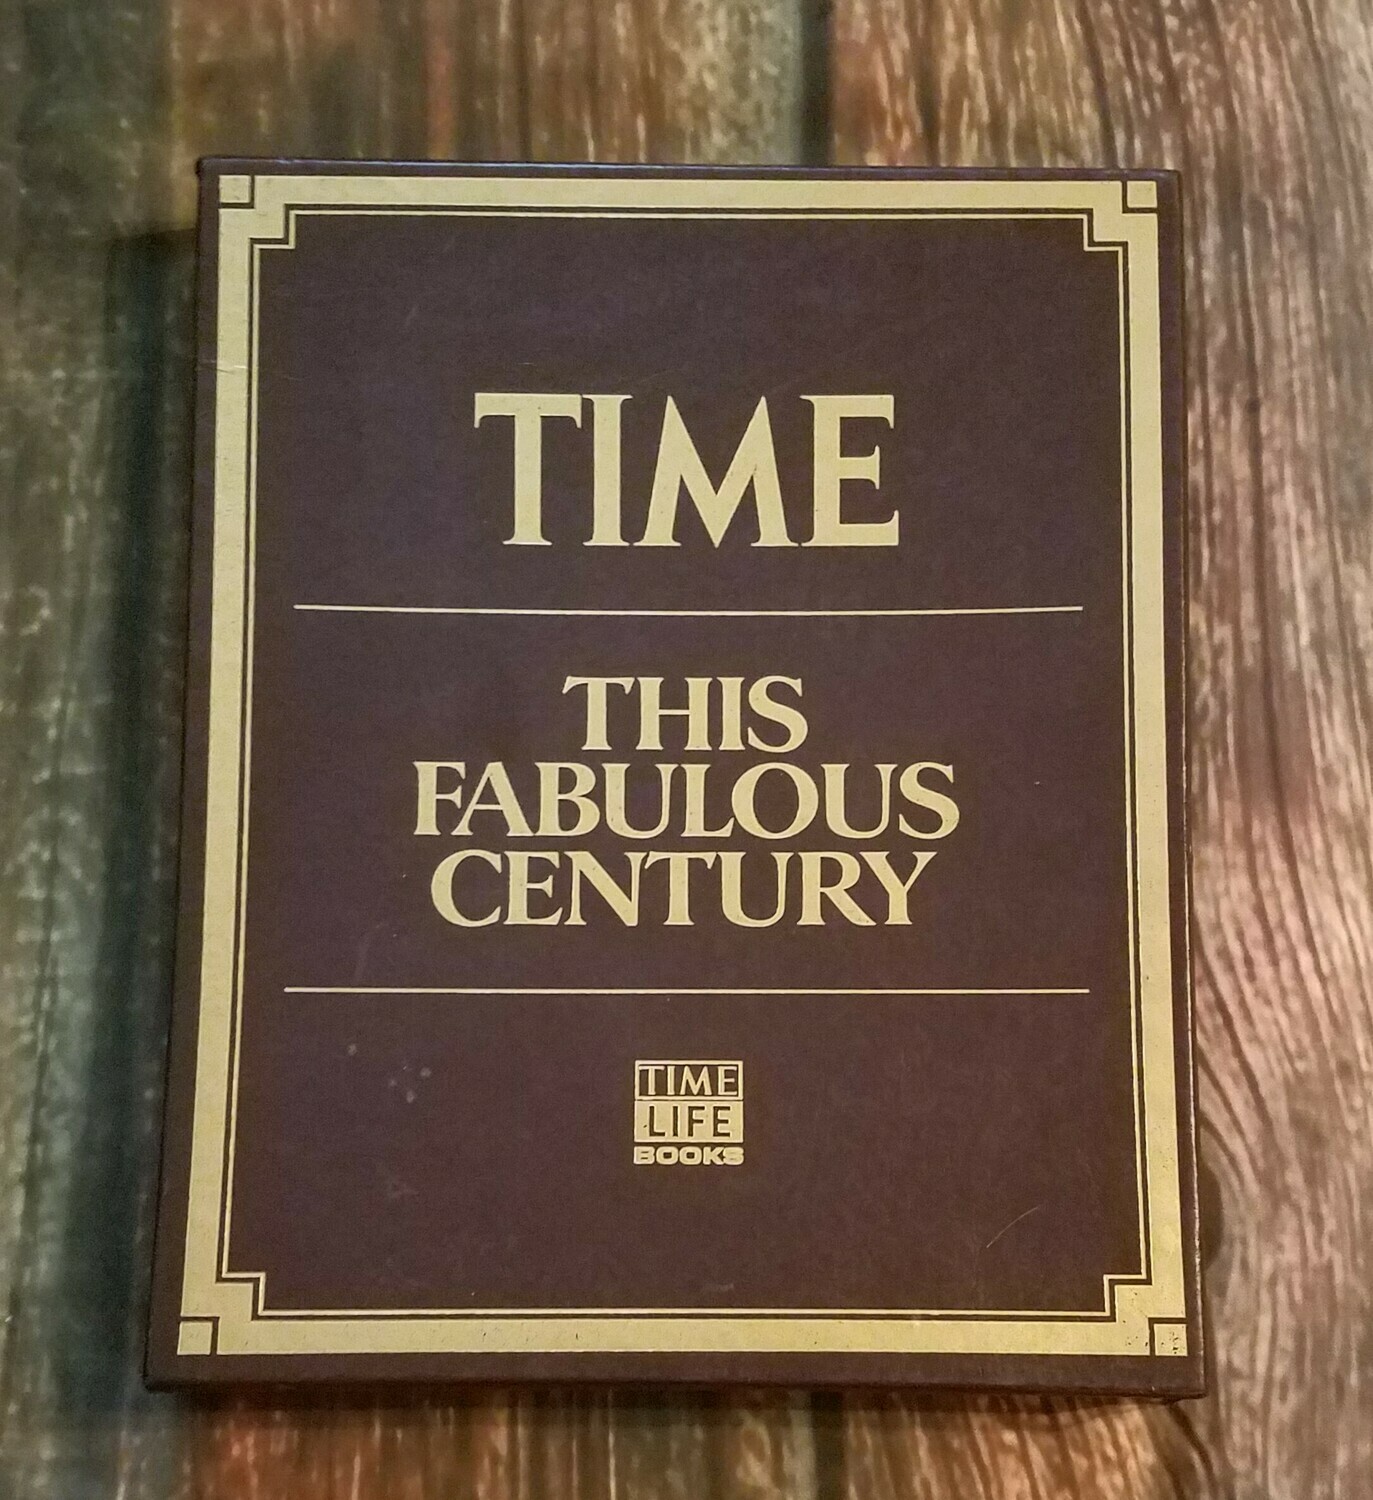 Time - This Fabulous Century by Editors of Time-Life Books